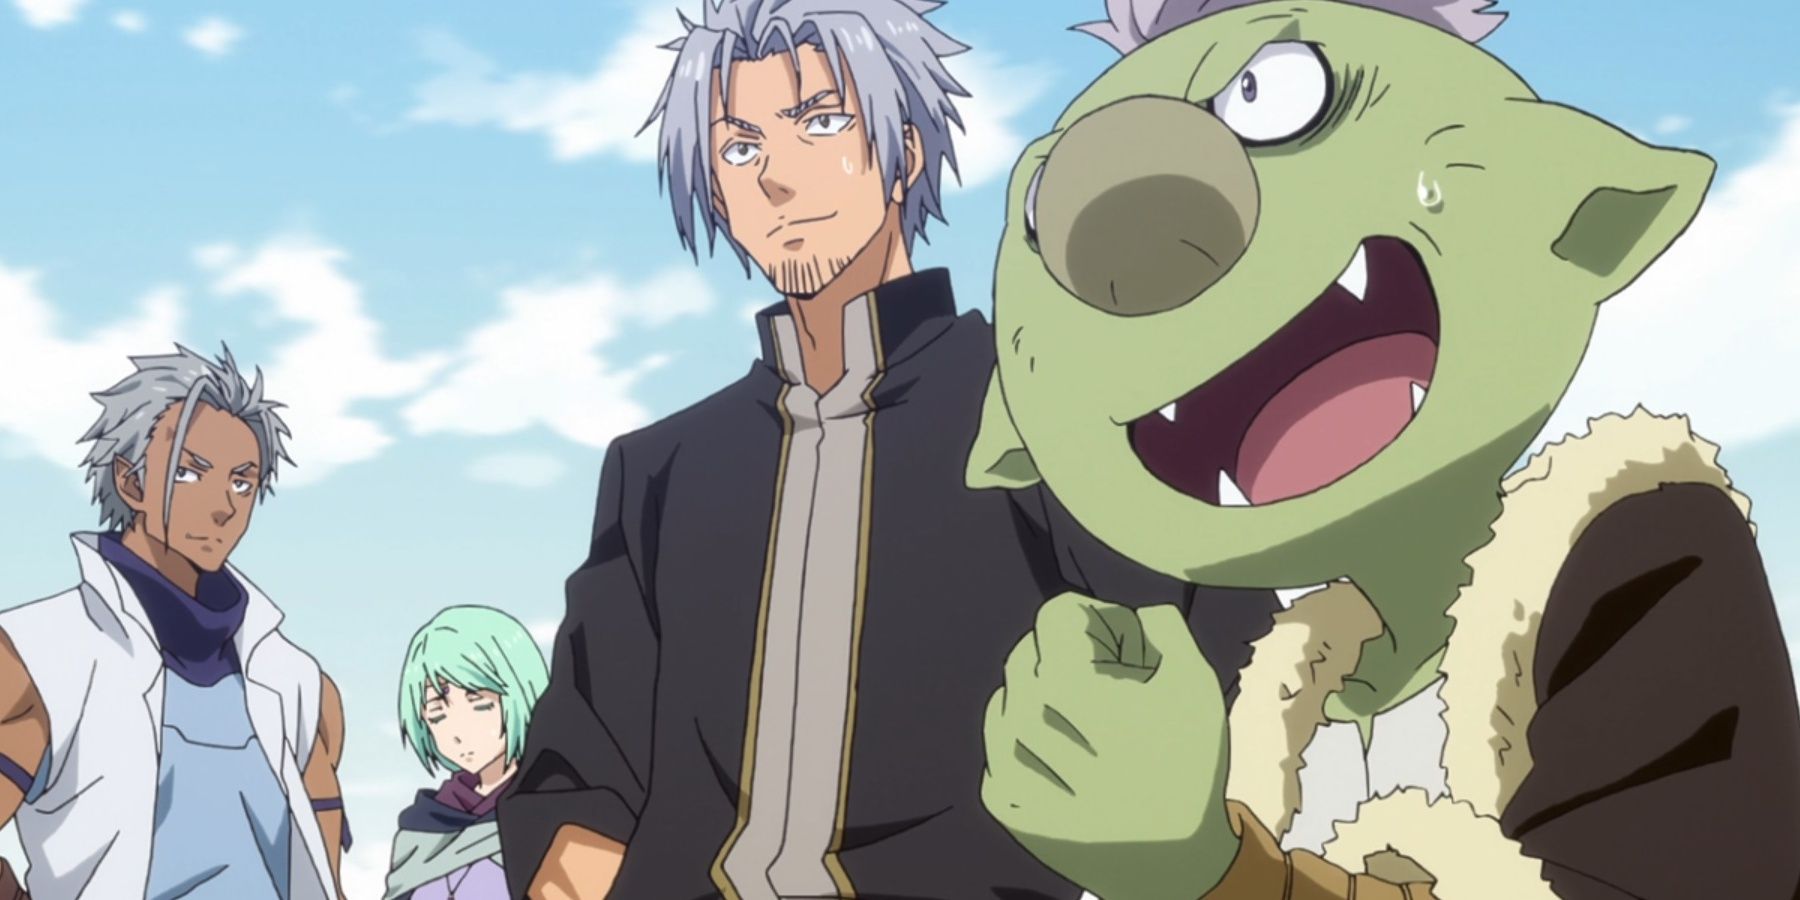 gobta slime in That Time I Got Reincarnated as a Slime